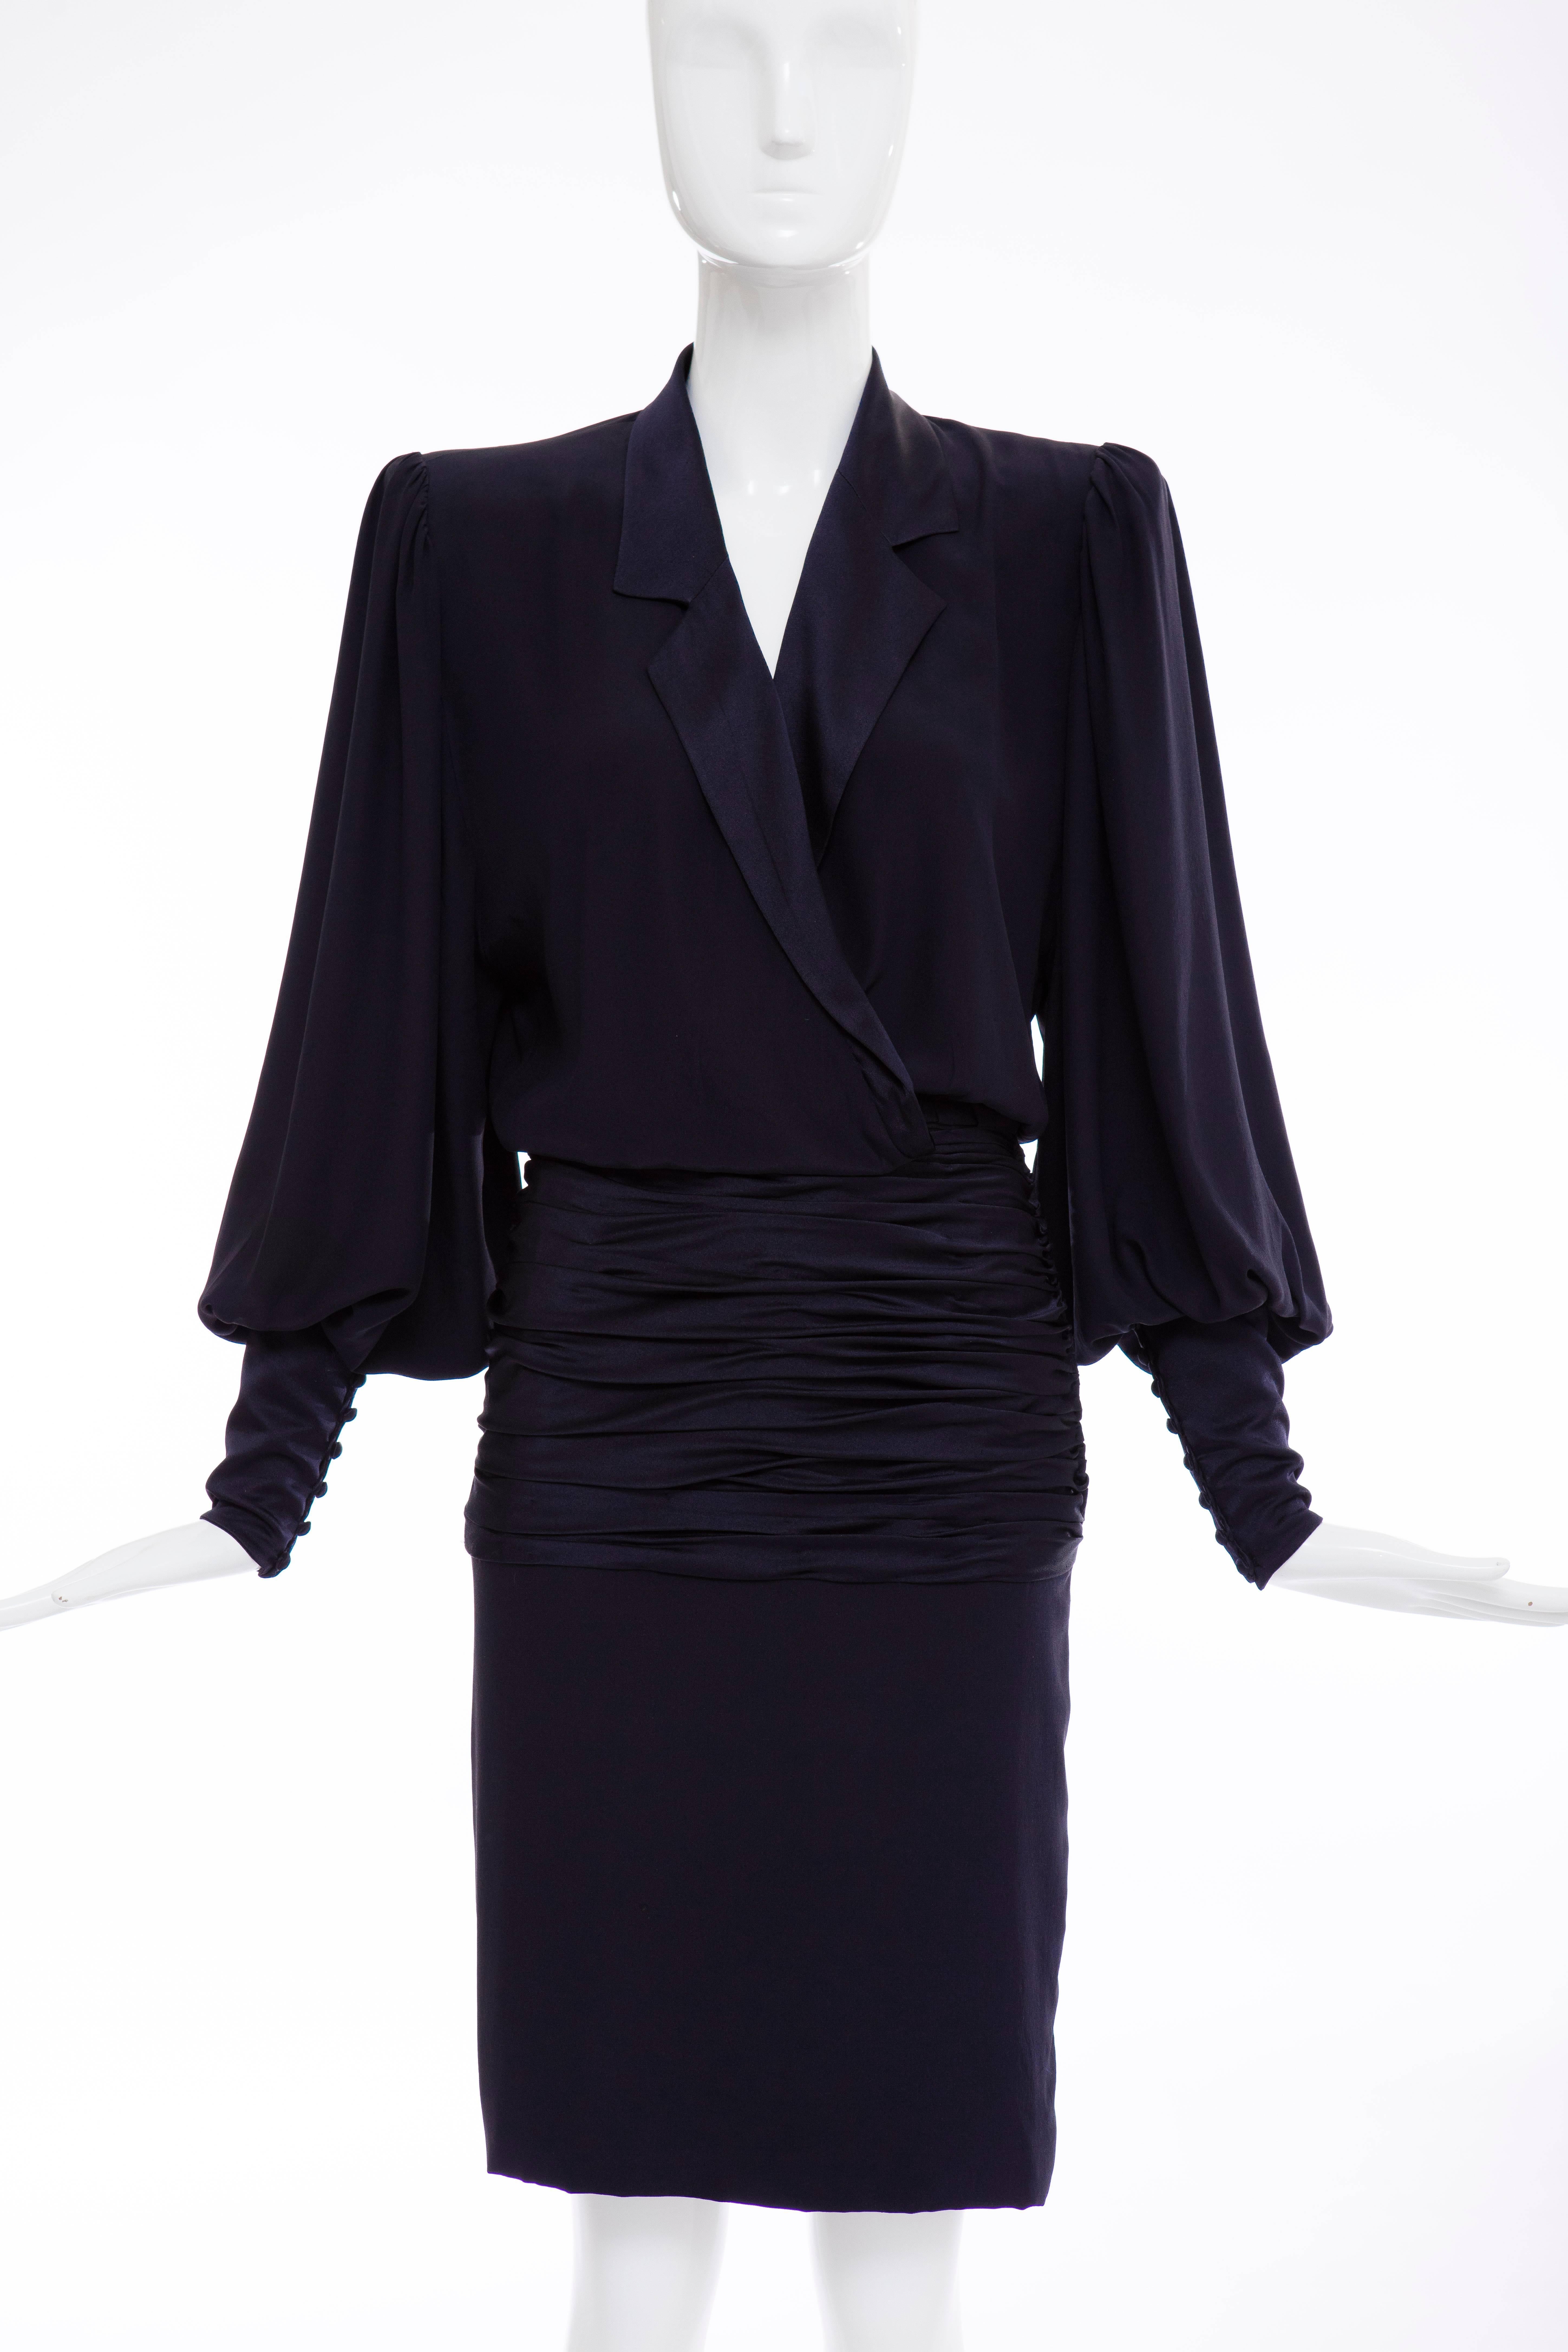 Jean - Louis Scherrer numbered Haute Couture, circa 1980's navy blue, silk crepe and silk satin dress, shawl collar, bishop sleeves, shoulder pads, shirred satin waist, concealed front snaps and fully lined in silk satin.